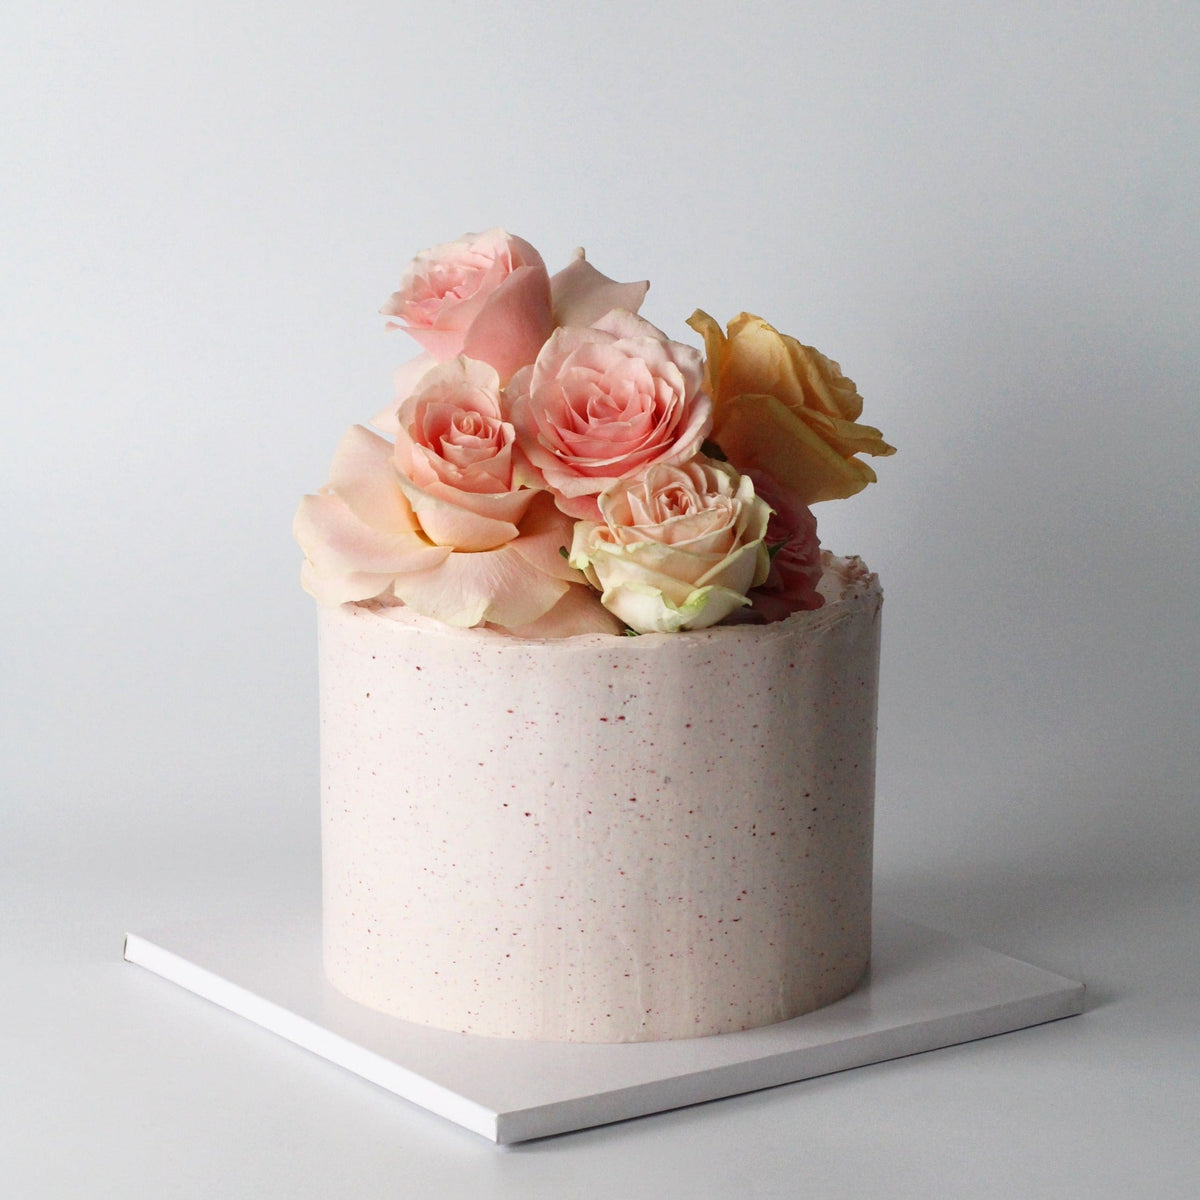 Our seasonal Rosie Cake iced with raspberry cream and topped with fresh roses!